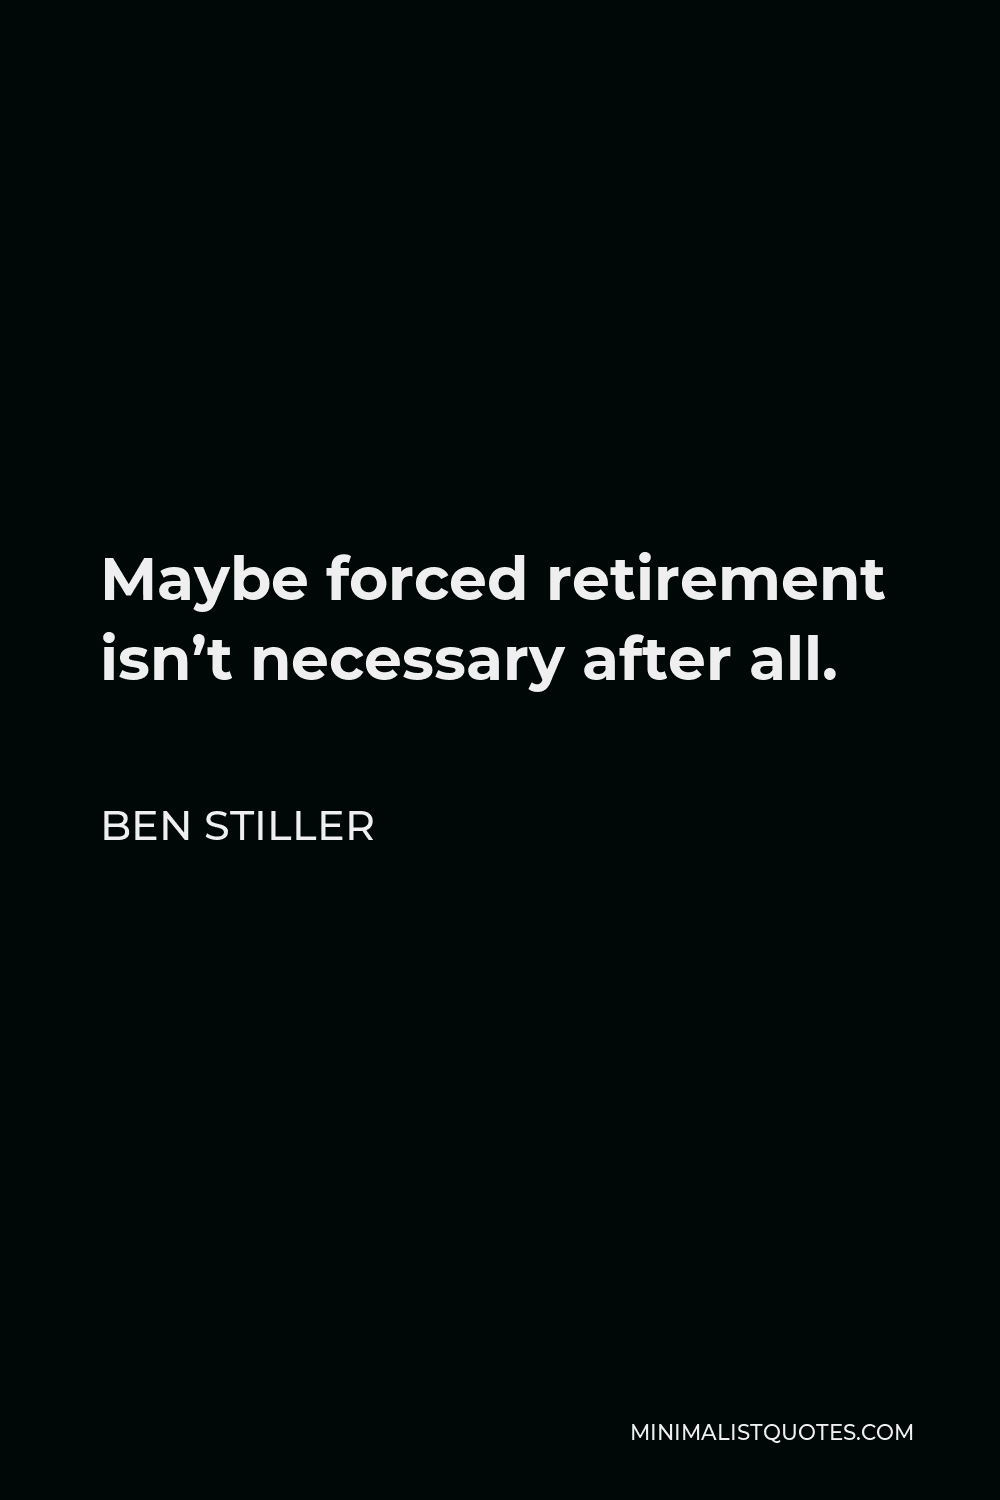 Ben Stiller Quote - Maybe forced retirement isn’t necessary after all.